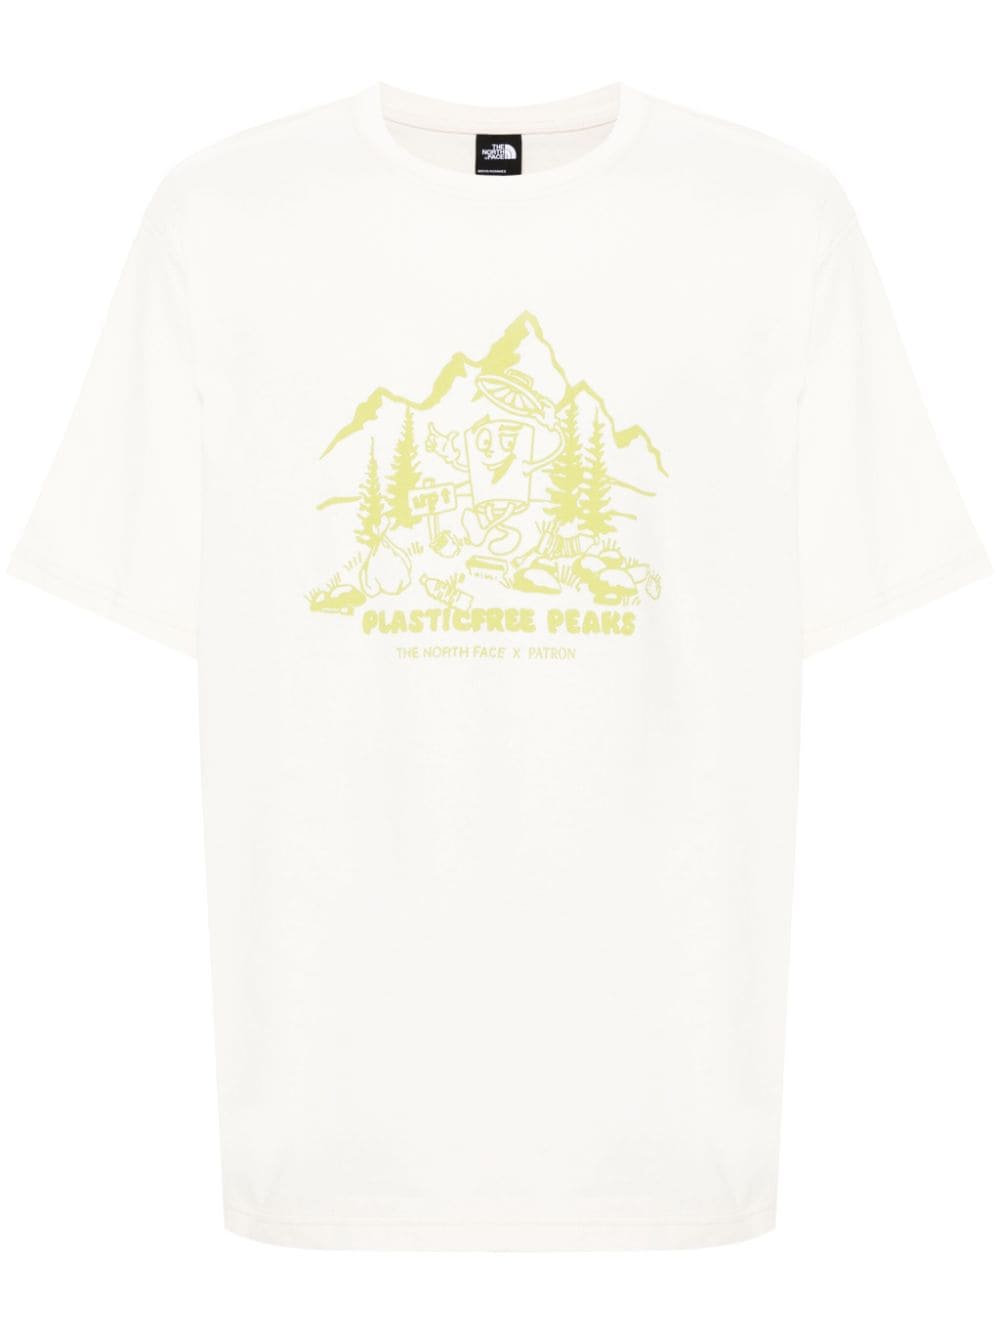 The North Face x Patron Nature cotton T-shirt - White von The North Face